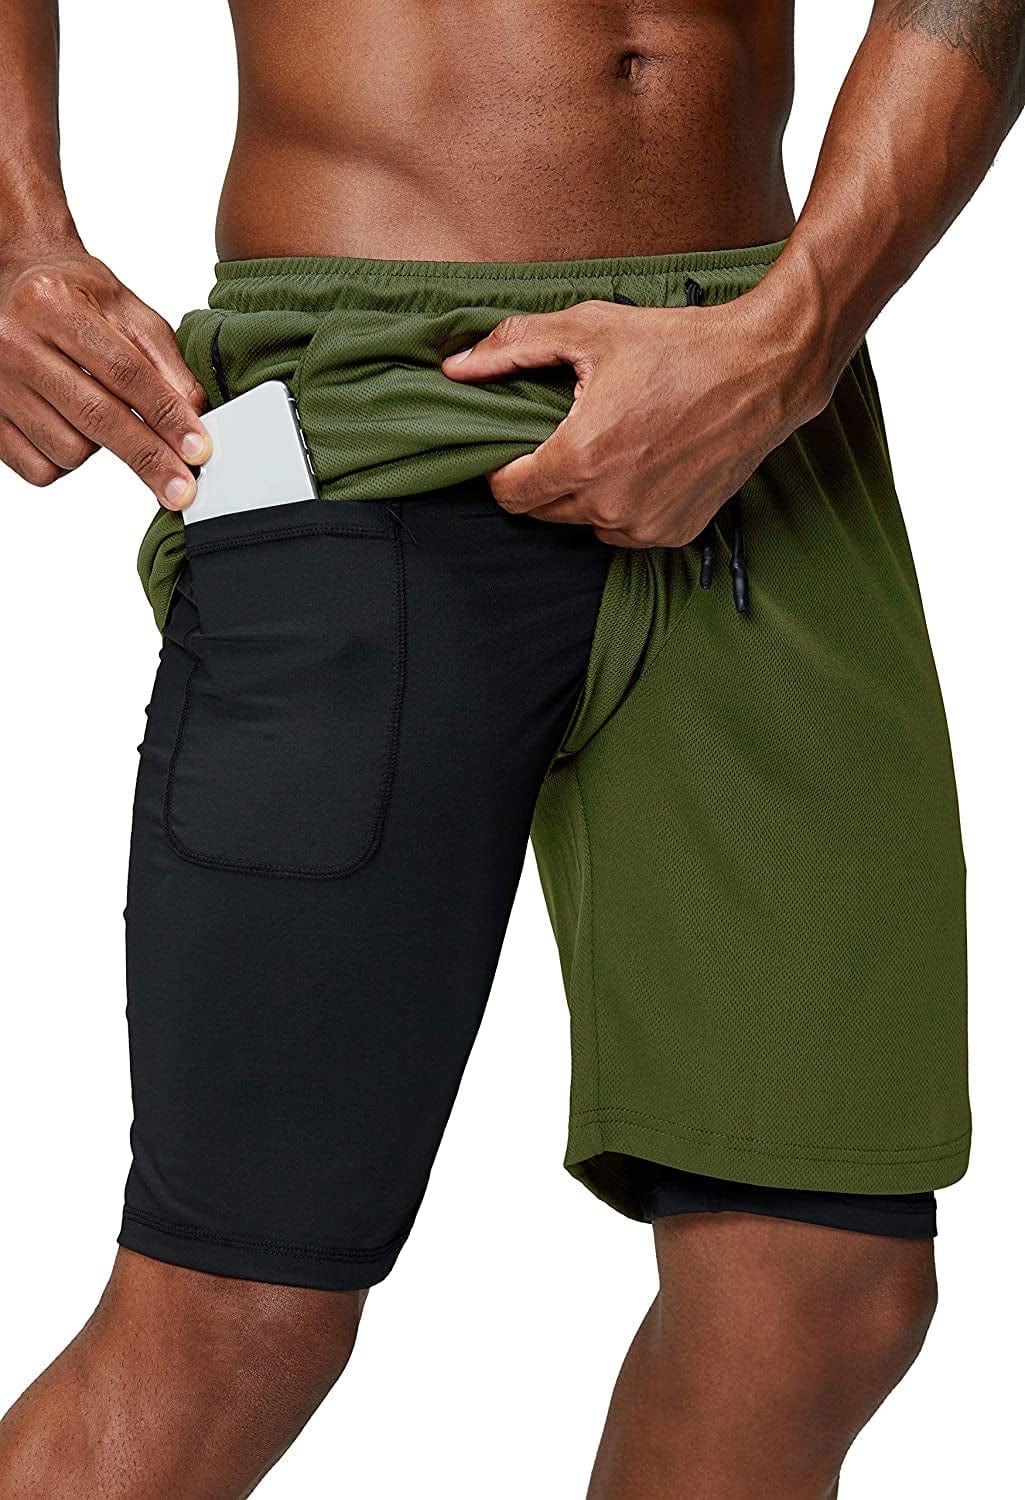 Pinkbomb Men'S 2 in 1 Running Shorts Gym Workout Quick Dry Mens Shorts with Phone Pocket Animals & Pet Supplies > Pet Supplies > Dog Supplies > Dog Apparel Pinkbomb Army Green 3X-Large 